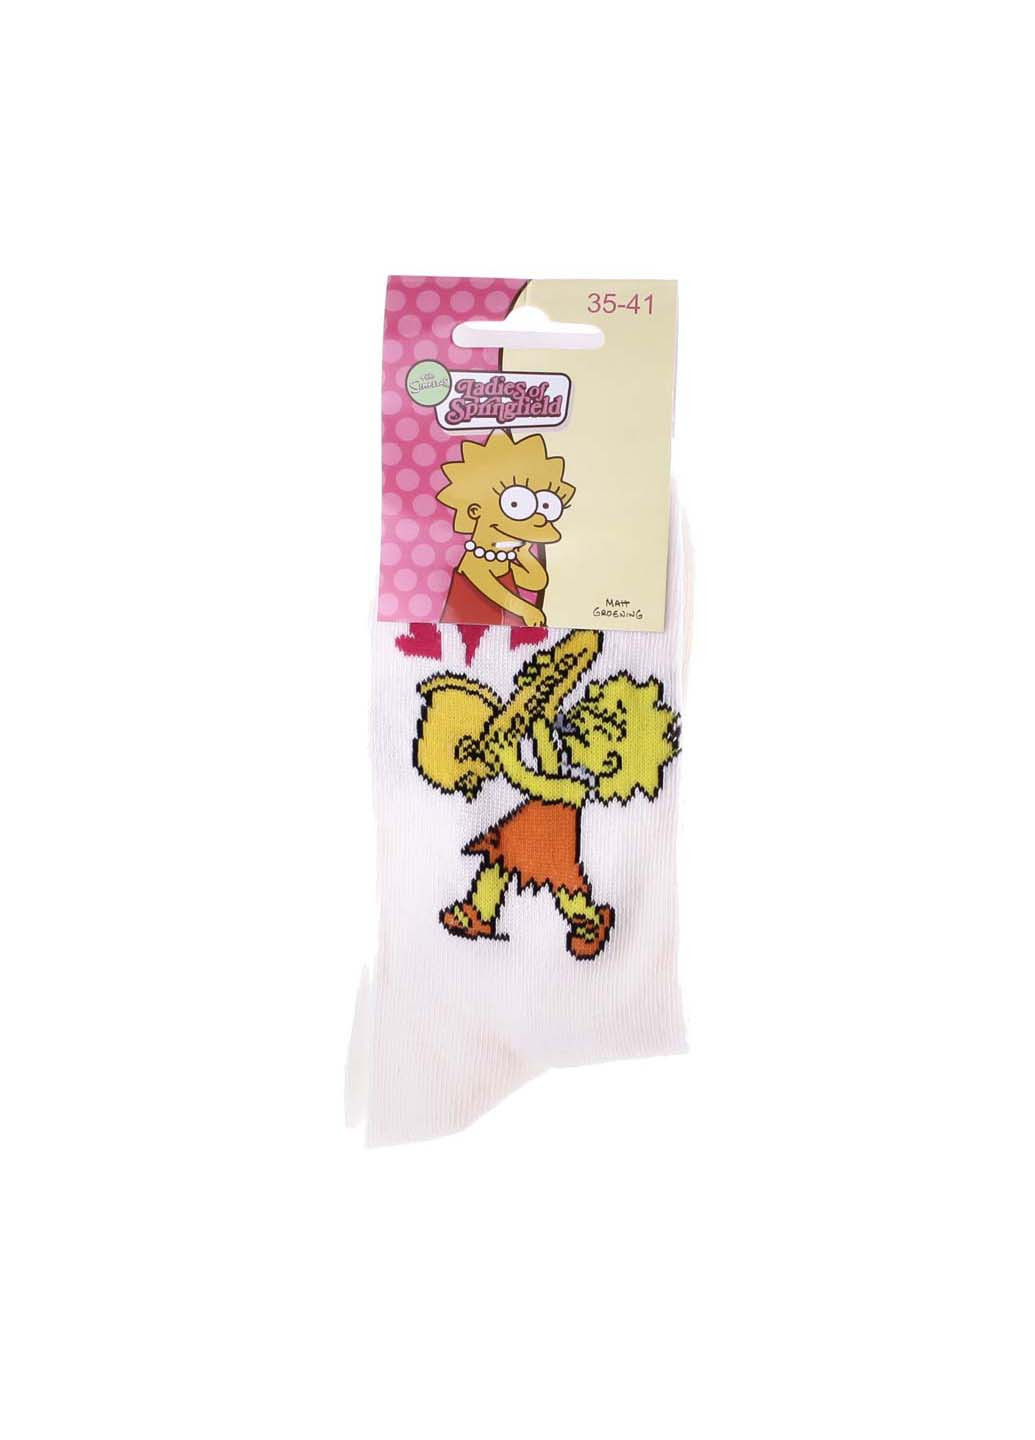 Носки The Simpsons lisa and saxo 1-pack (256931457)